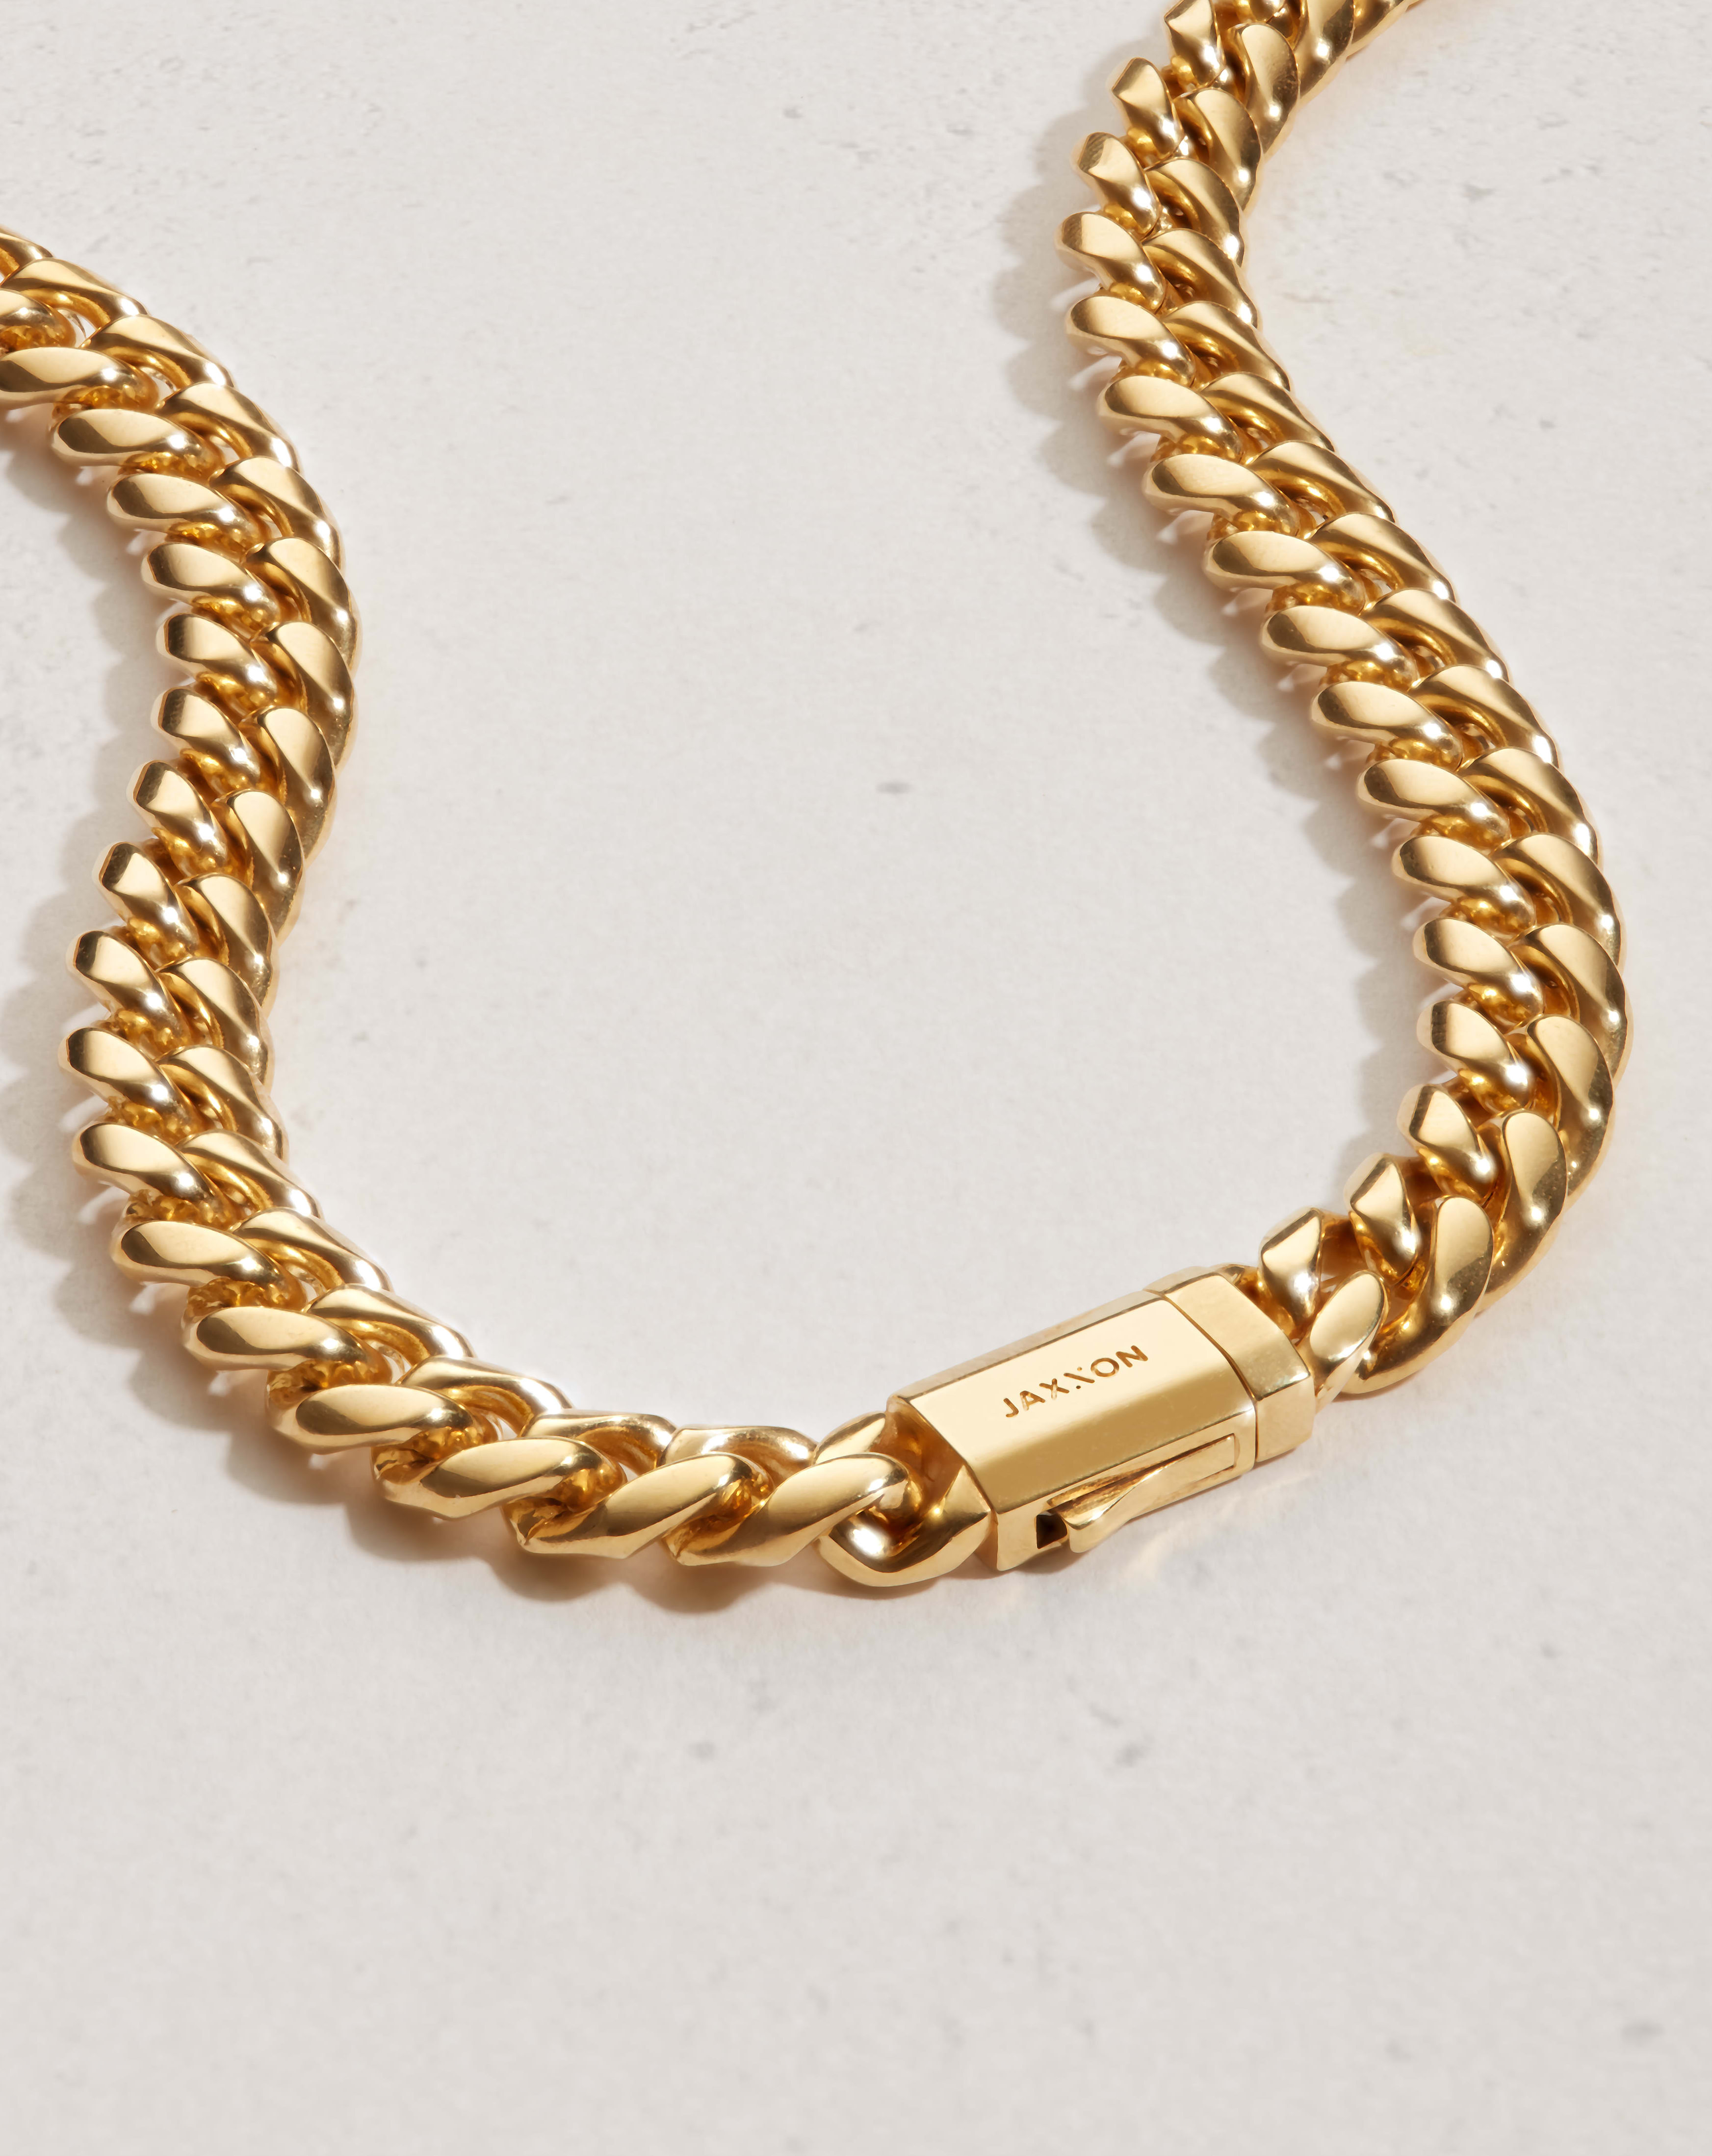 Image Cuban Link Chain - 10mm Gold - The Ultimate Clasp